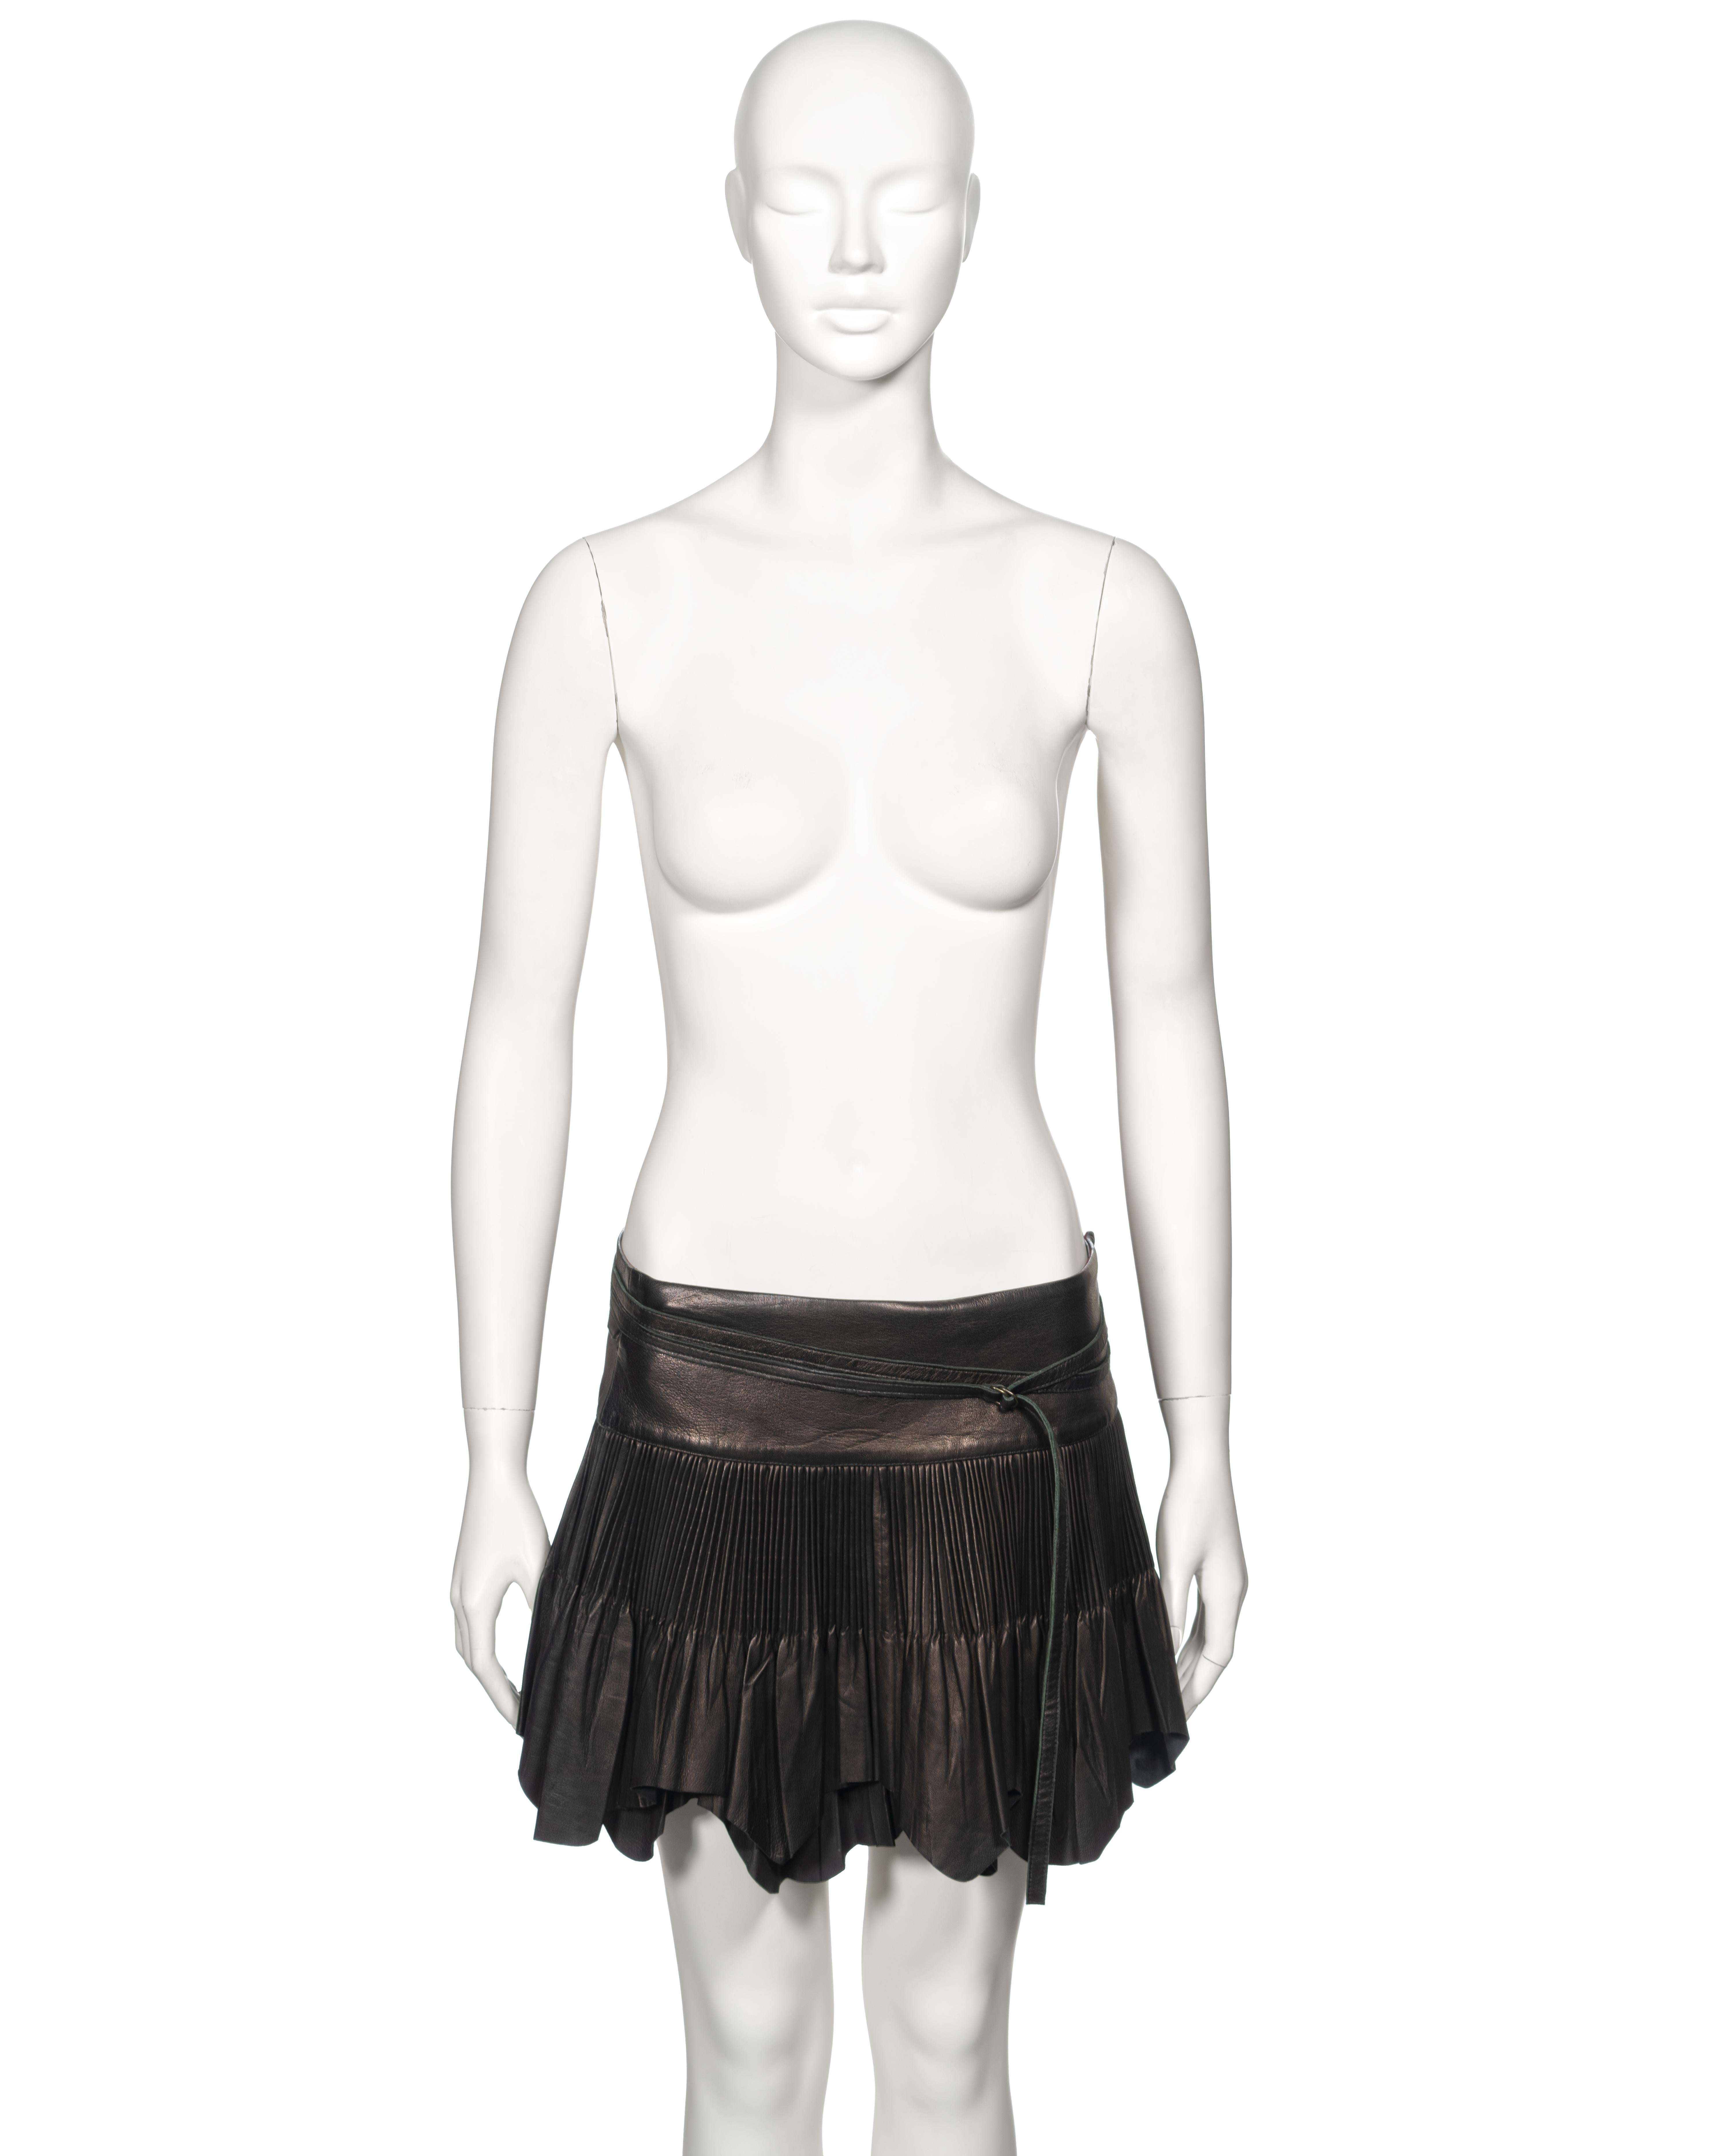 ▪ Archival Jean Paul Gaultier Leather Mini Skirt 
▪ Fall-Winter 2003
▪ Sold by One of a Kind Archive
▪ Constructed from black leather
▪ Cartridge pleats 
▪ Raw-edge hem 
▪ Self-tie wrap fastening
▪ IT42 - FR38 - UK10
▪ Made in Italy

The photographs